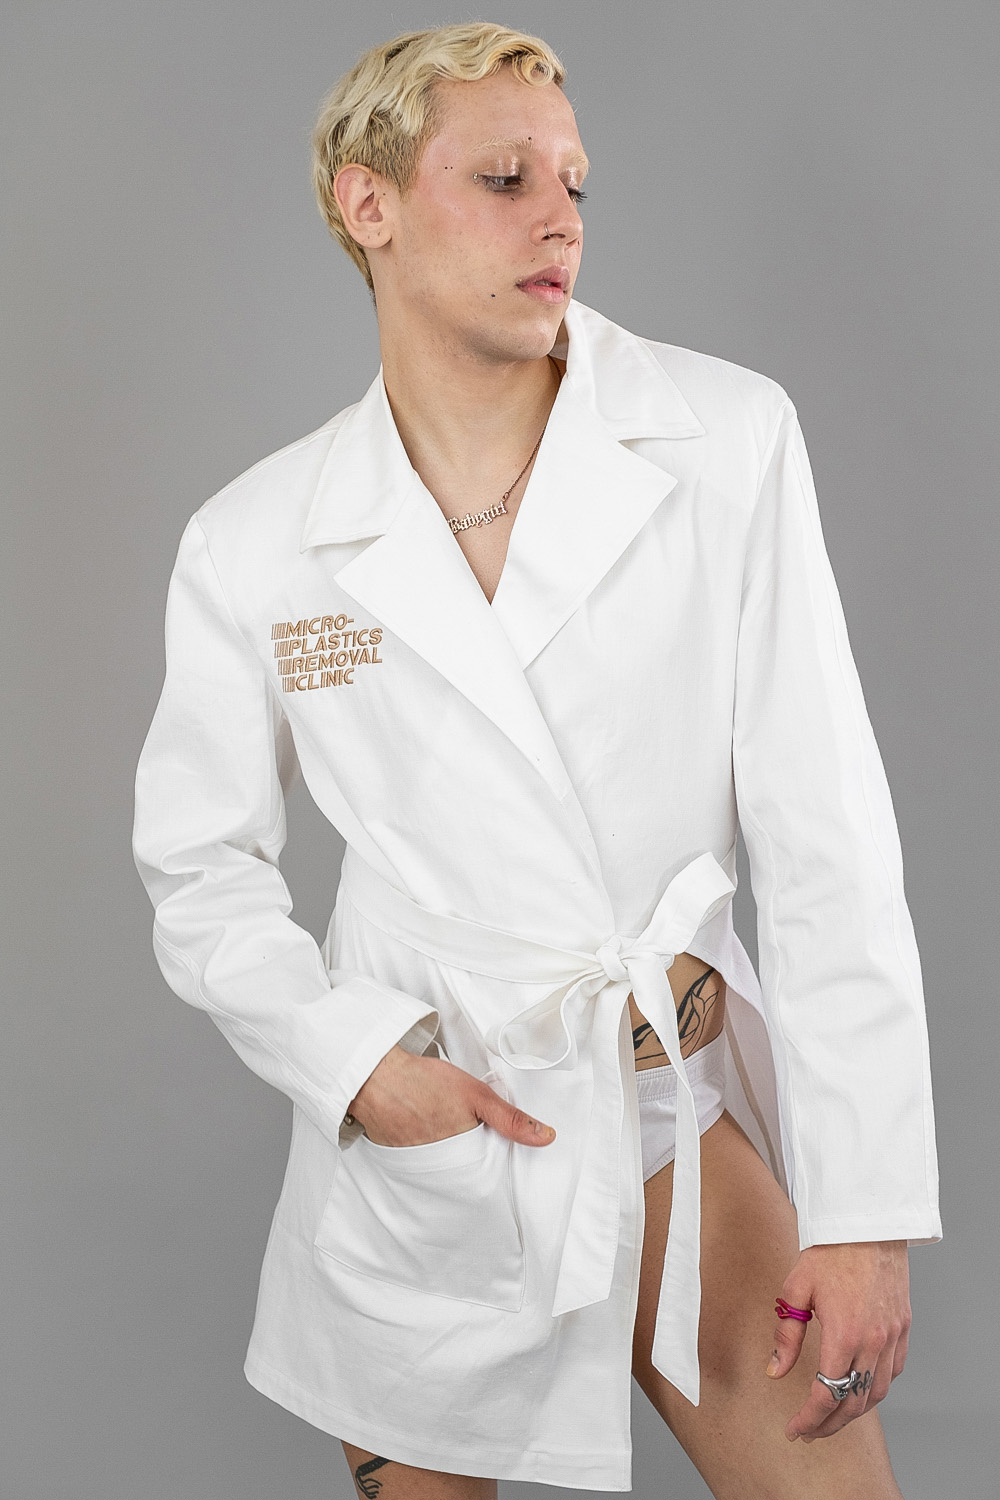 Removal Clinic Jacket 8